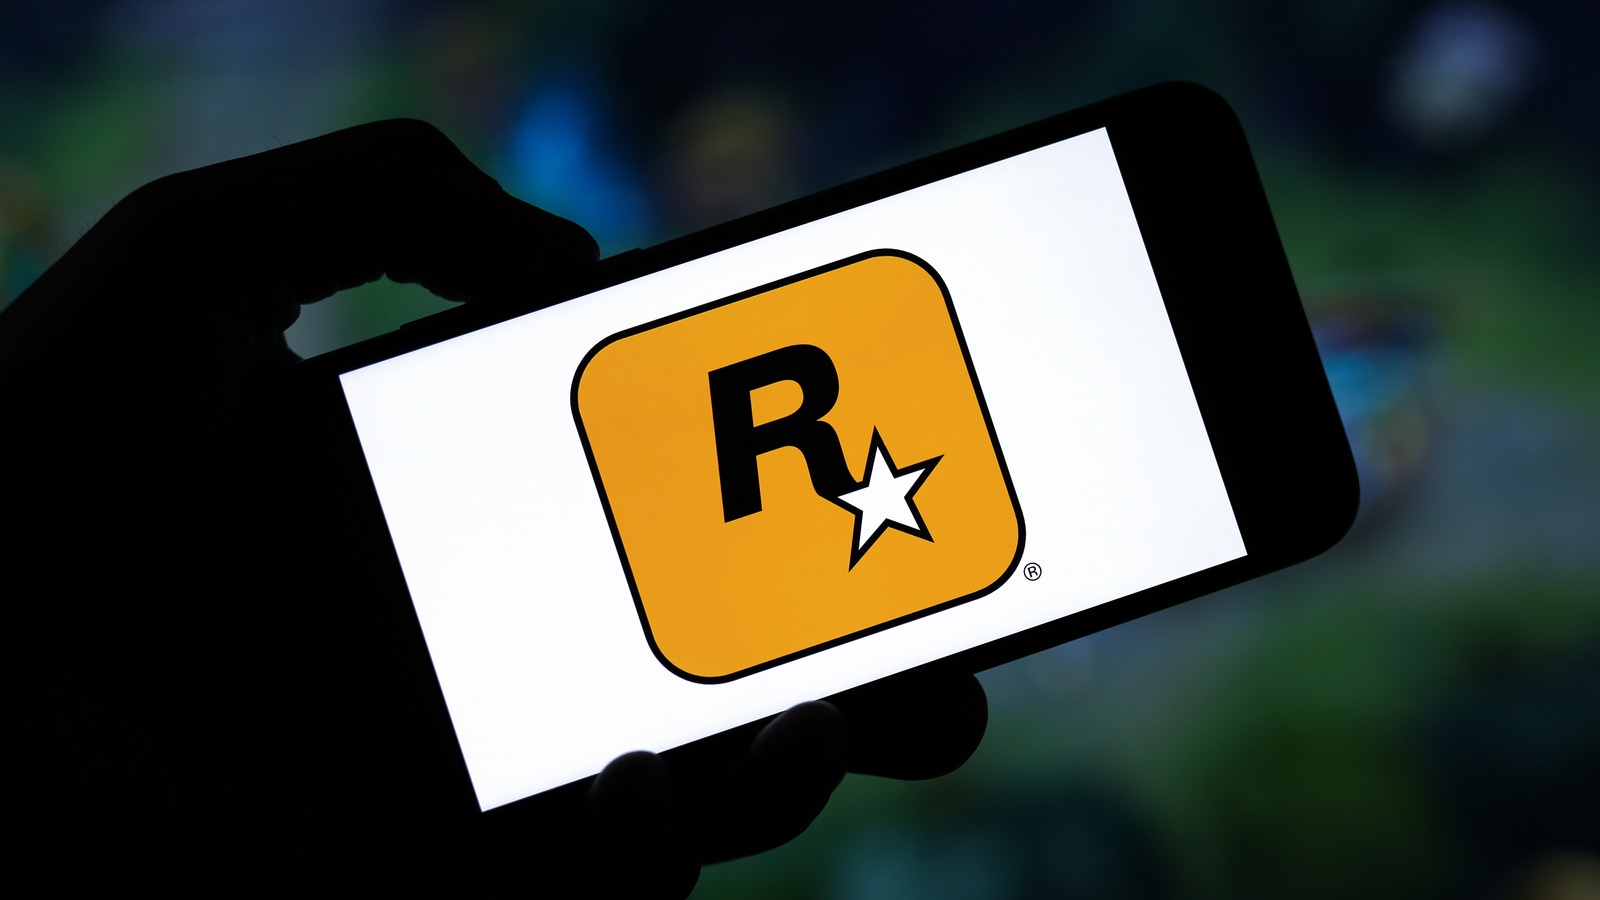 Agent: The Overhyped Rockstar Game That Was Never Released